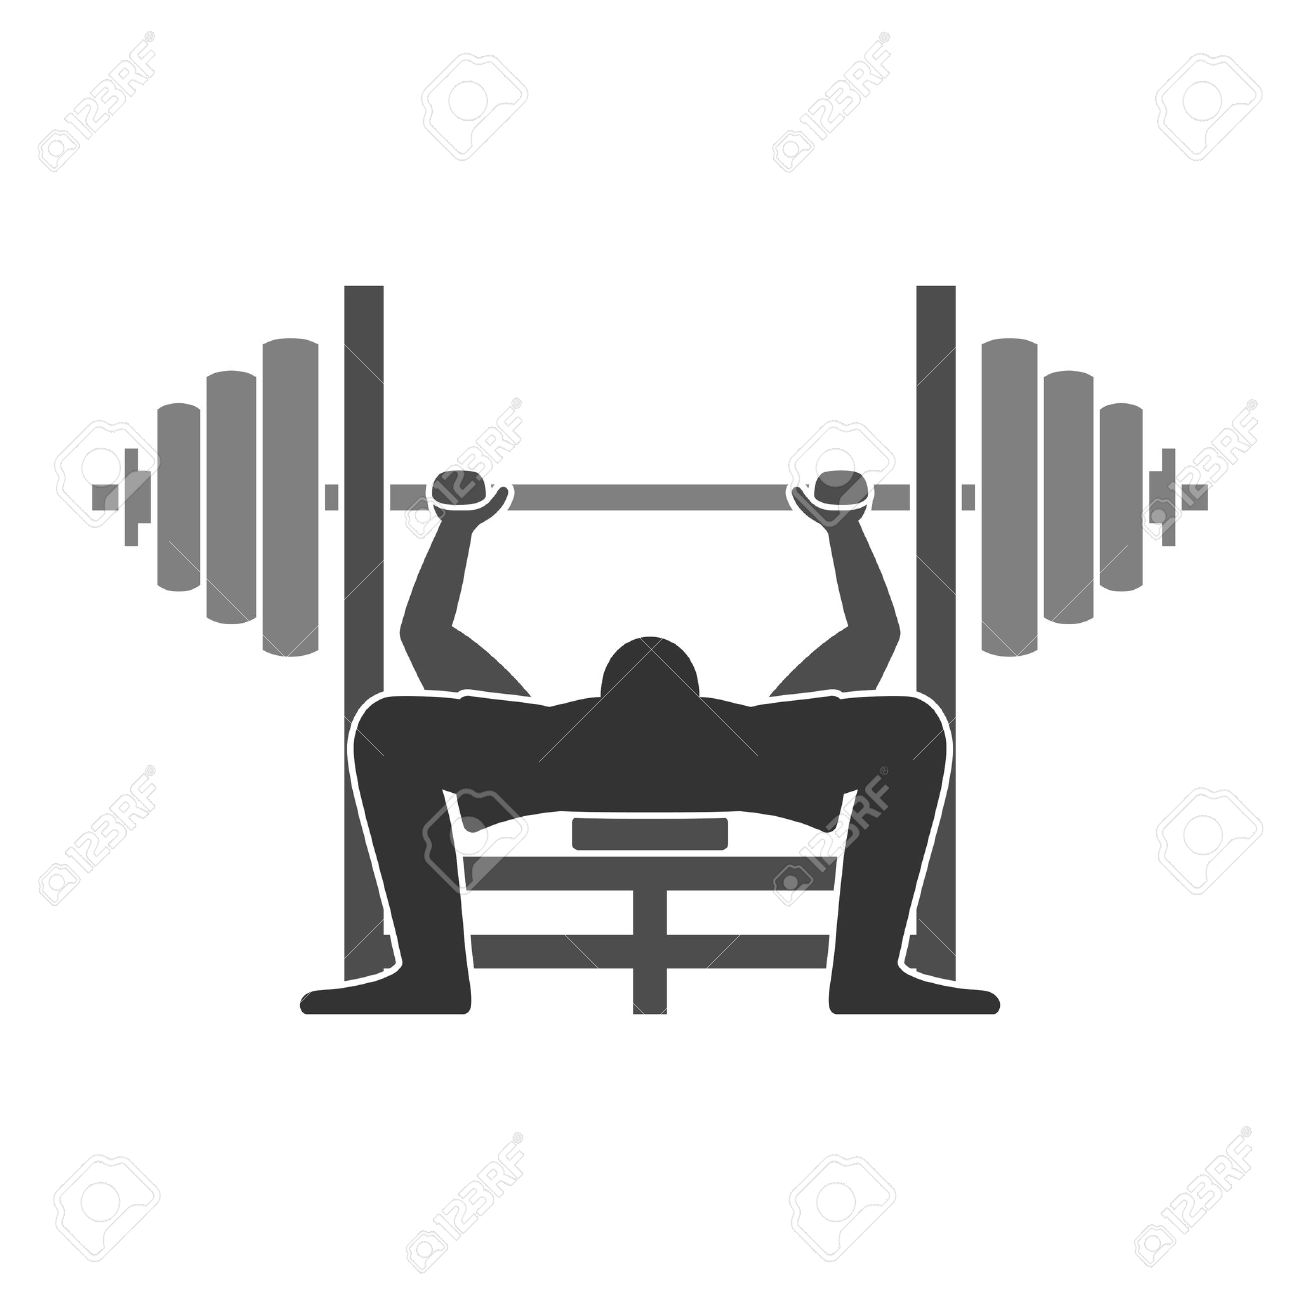 Bench press clipart - Clipground